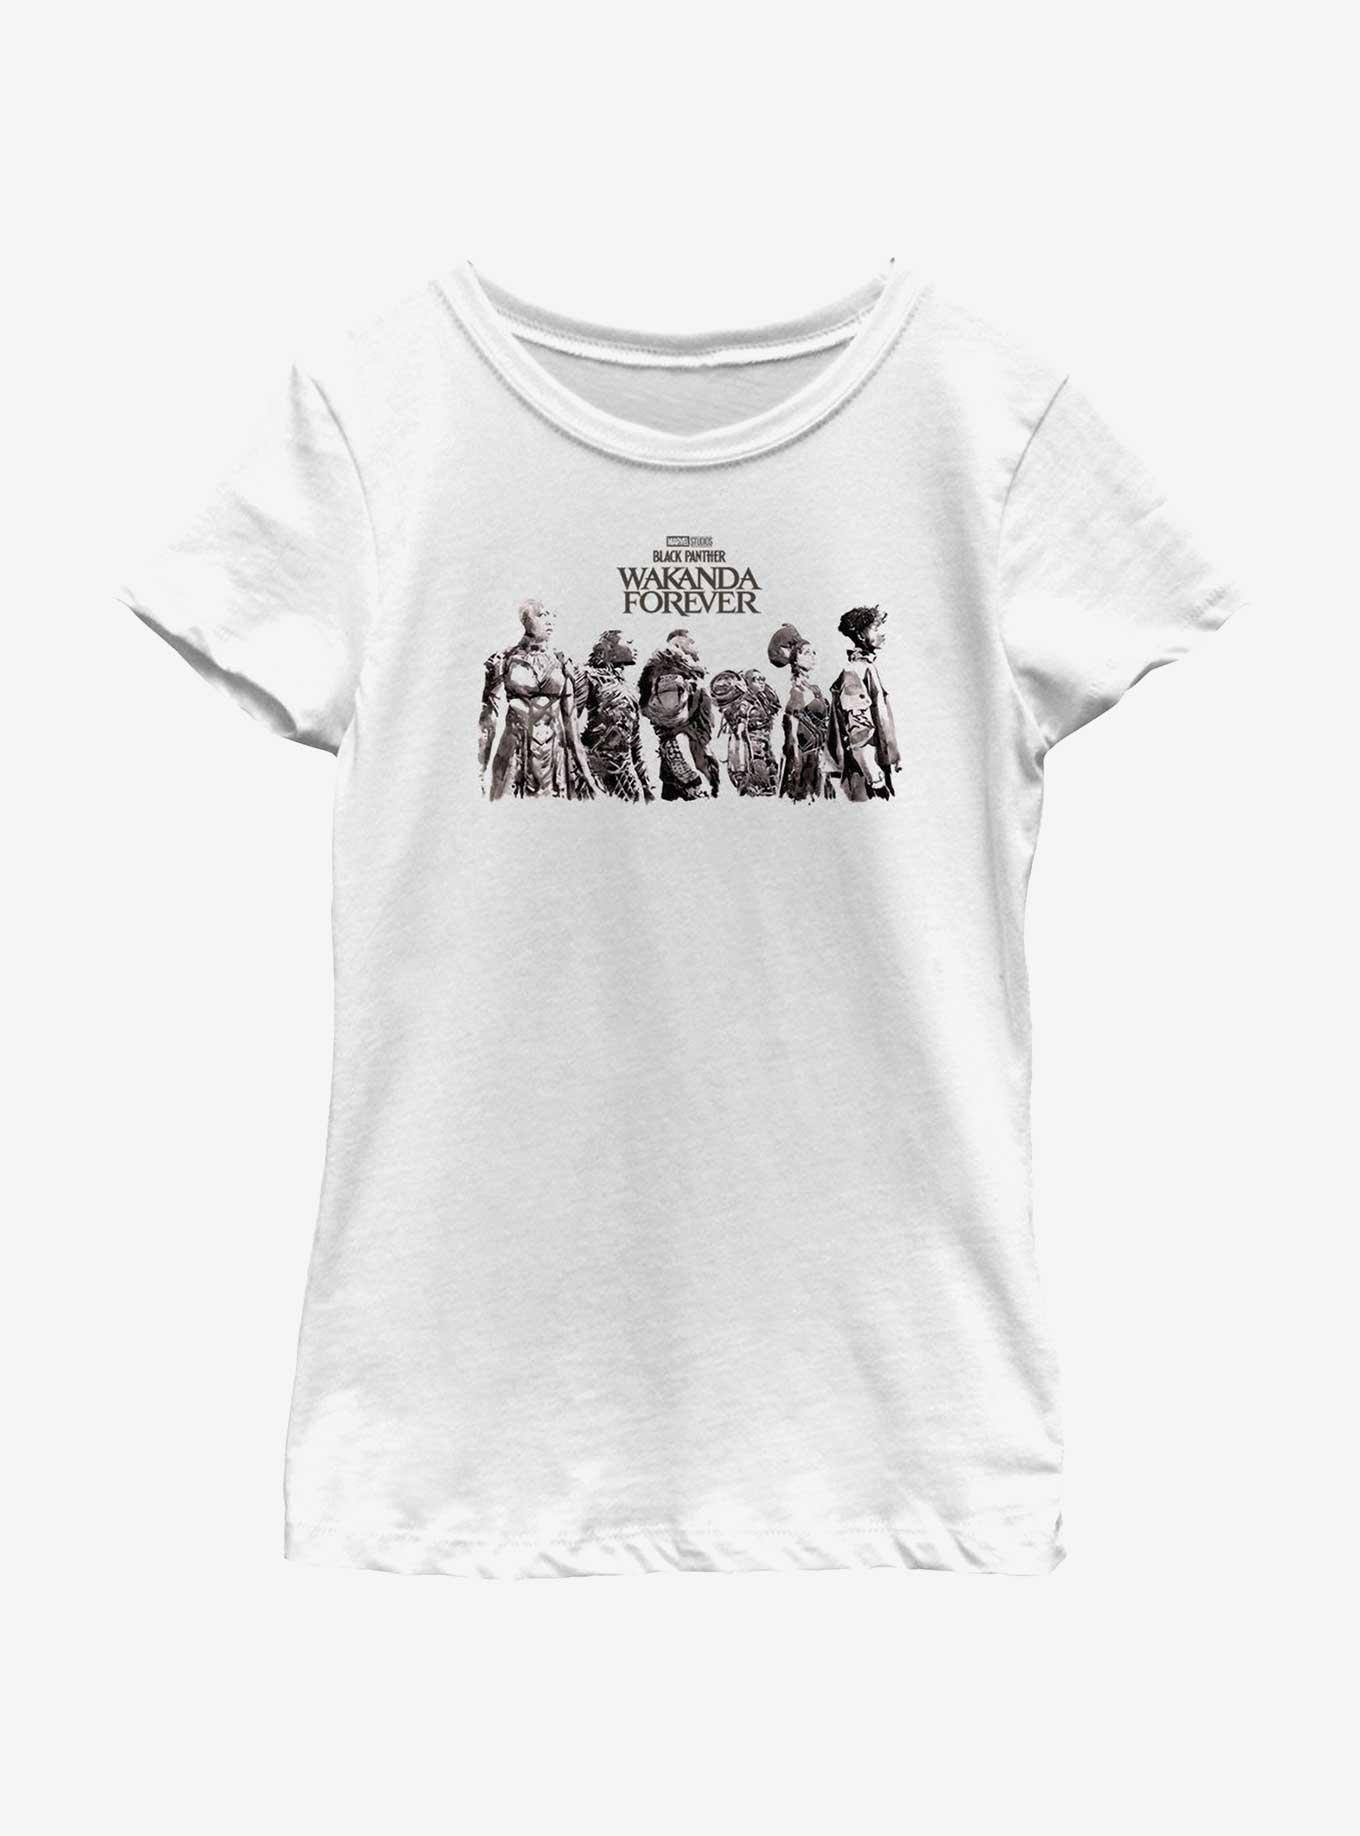 Marvel Black Panther: Wakanda Forever Character Lineup Youth Girls T-Shirt, WHITE, hi-res